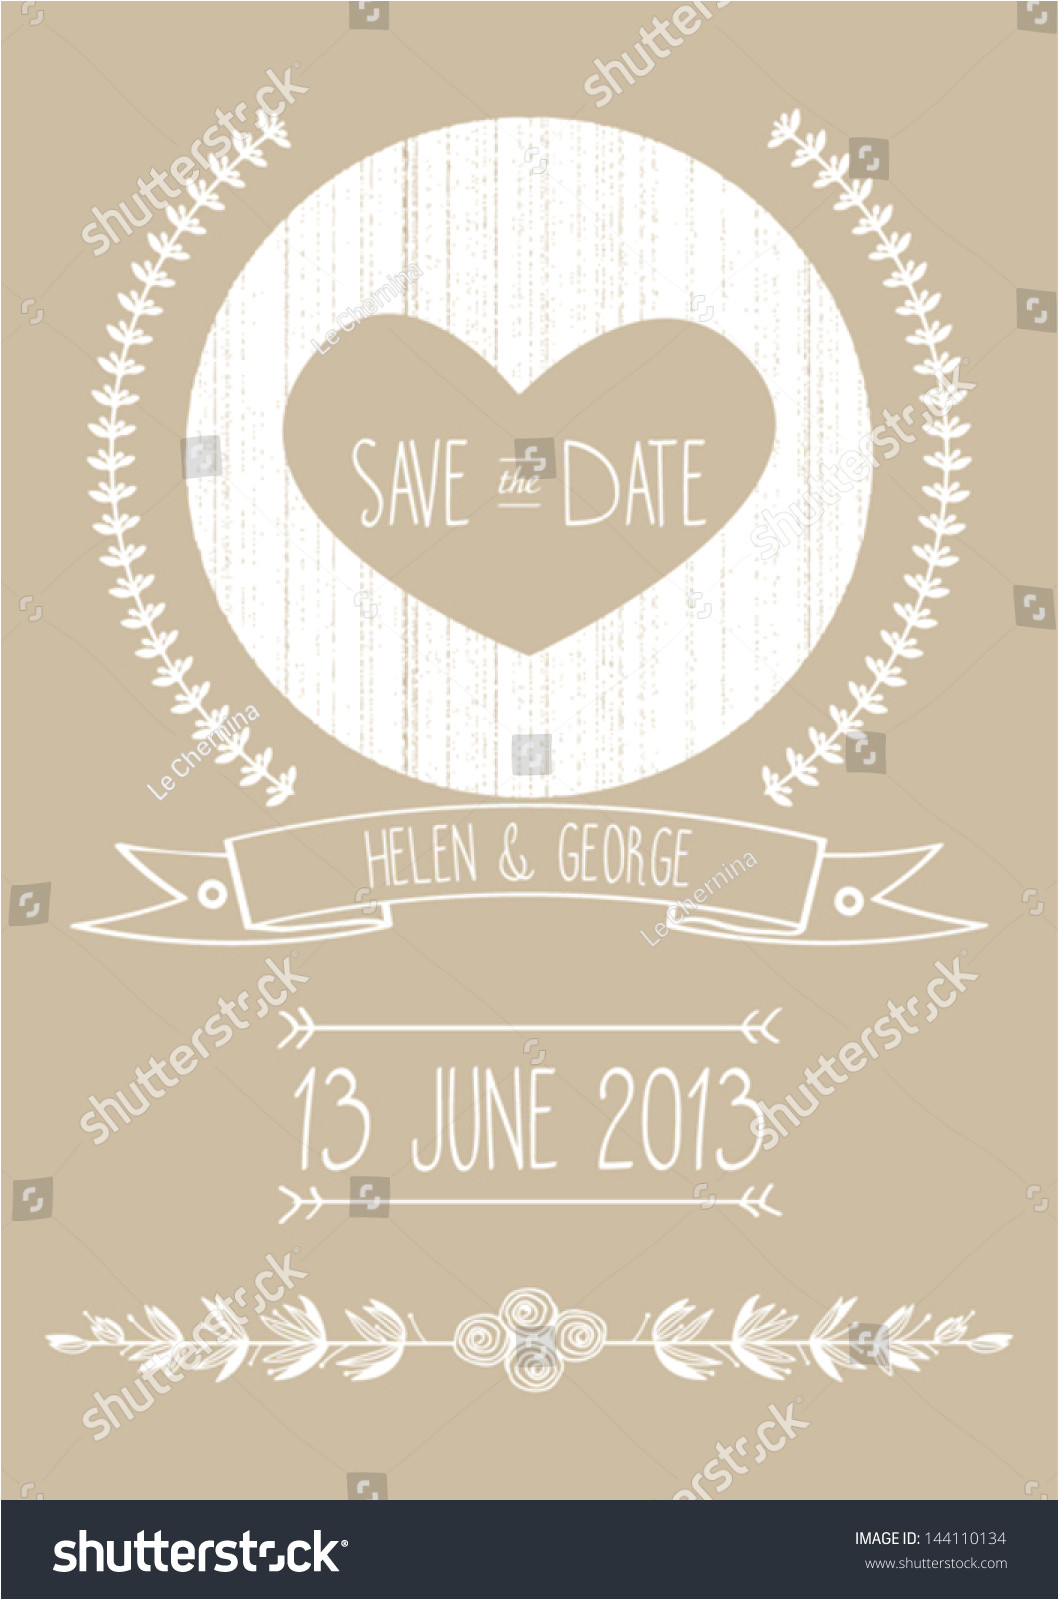 stock vector save the date wedding invitation template vector illustration